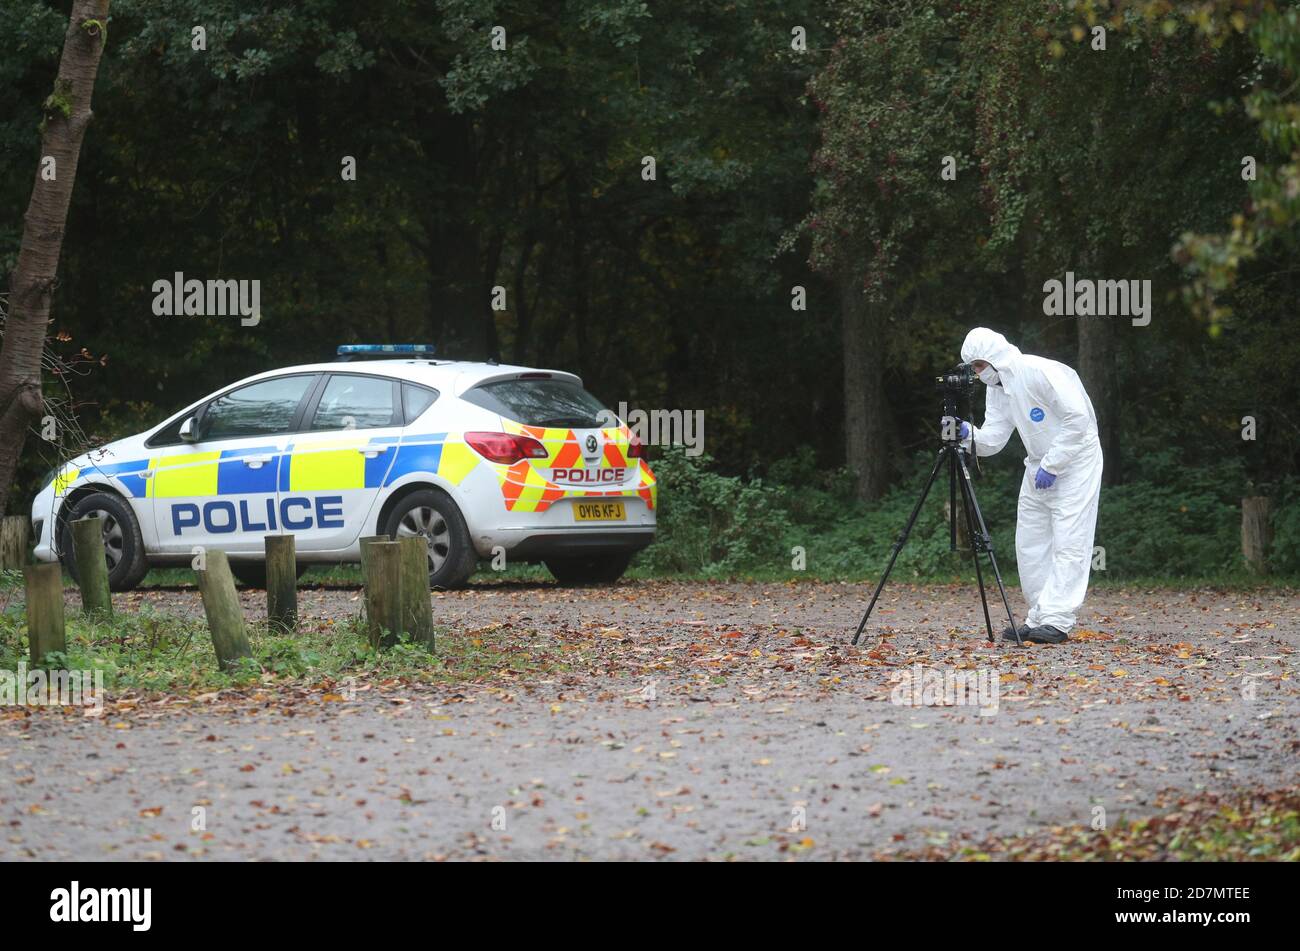 Forensic investigators at Watlington Hill in Oxfordshire after the body of a woman was discovered at the National Trust estate, a man has been arrested on suspicion of murder and is being treated for serious injuries, police said. Stock Photo